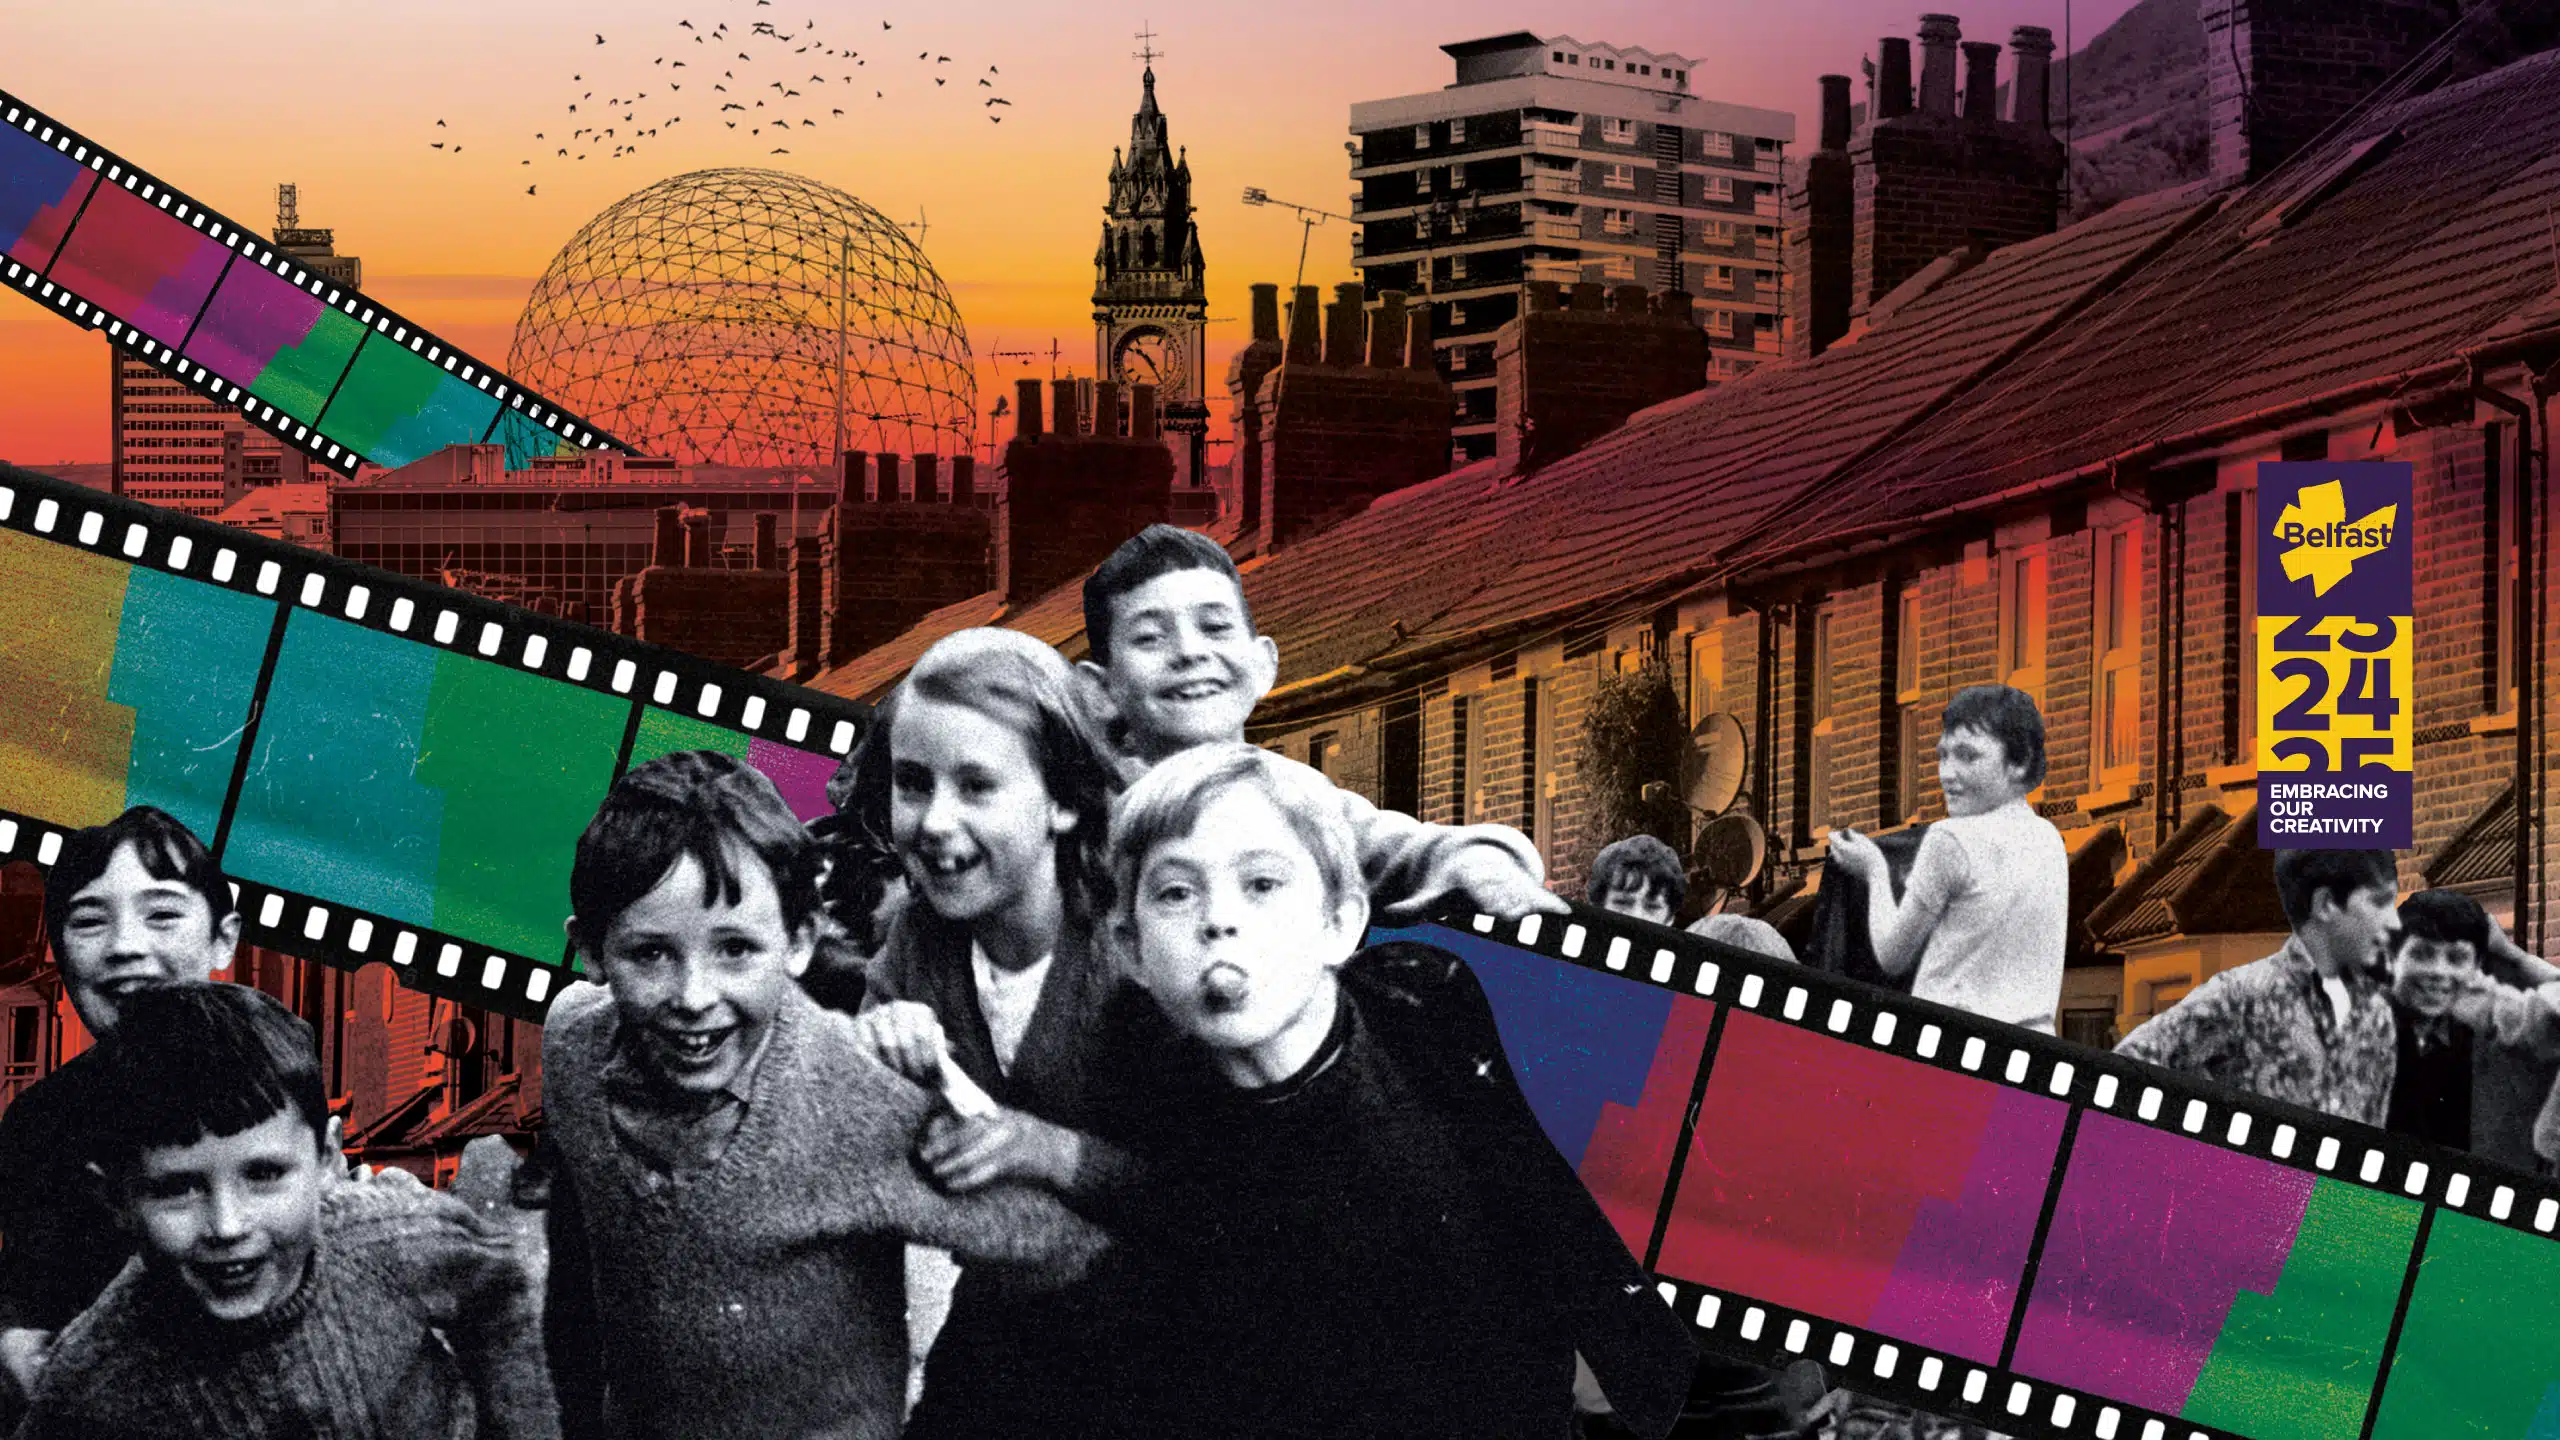 A colourful digital image of the city of Belfast with streets and skyline, crossed by images of photo film and people.